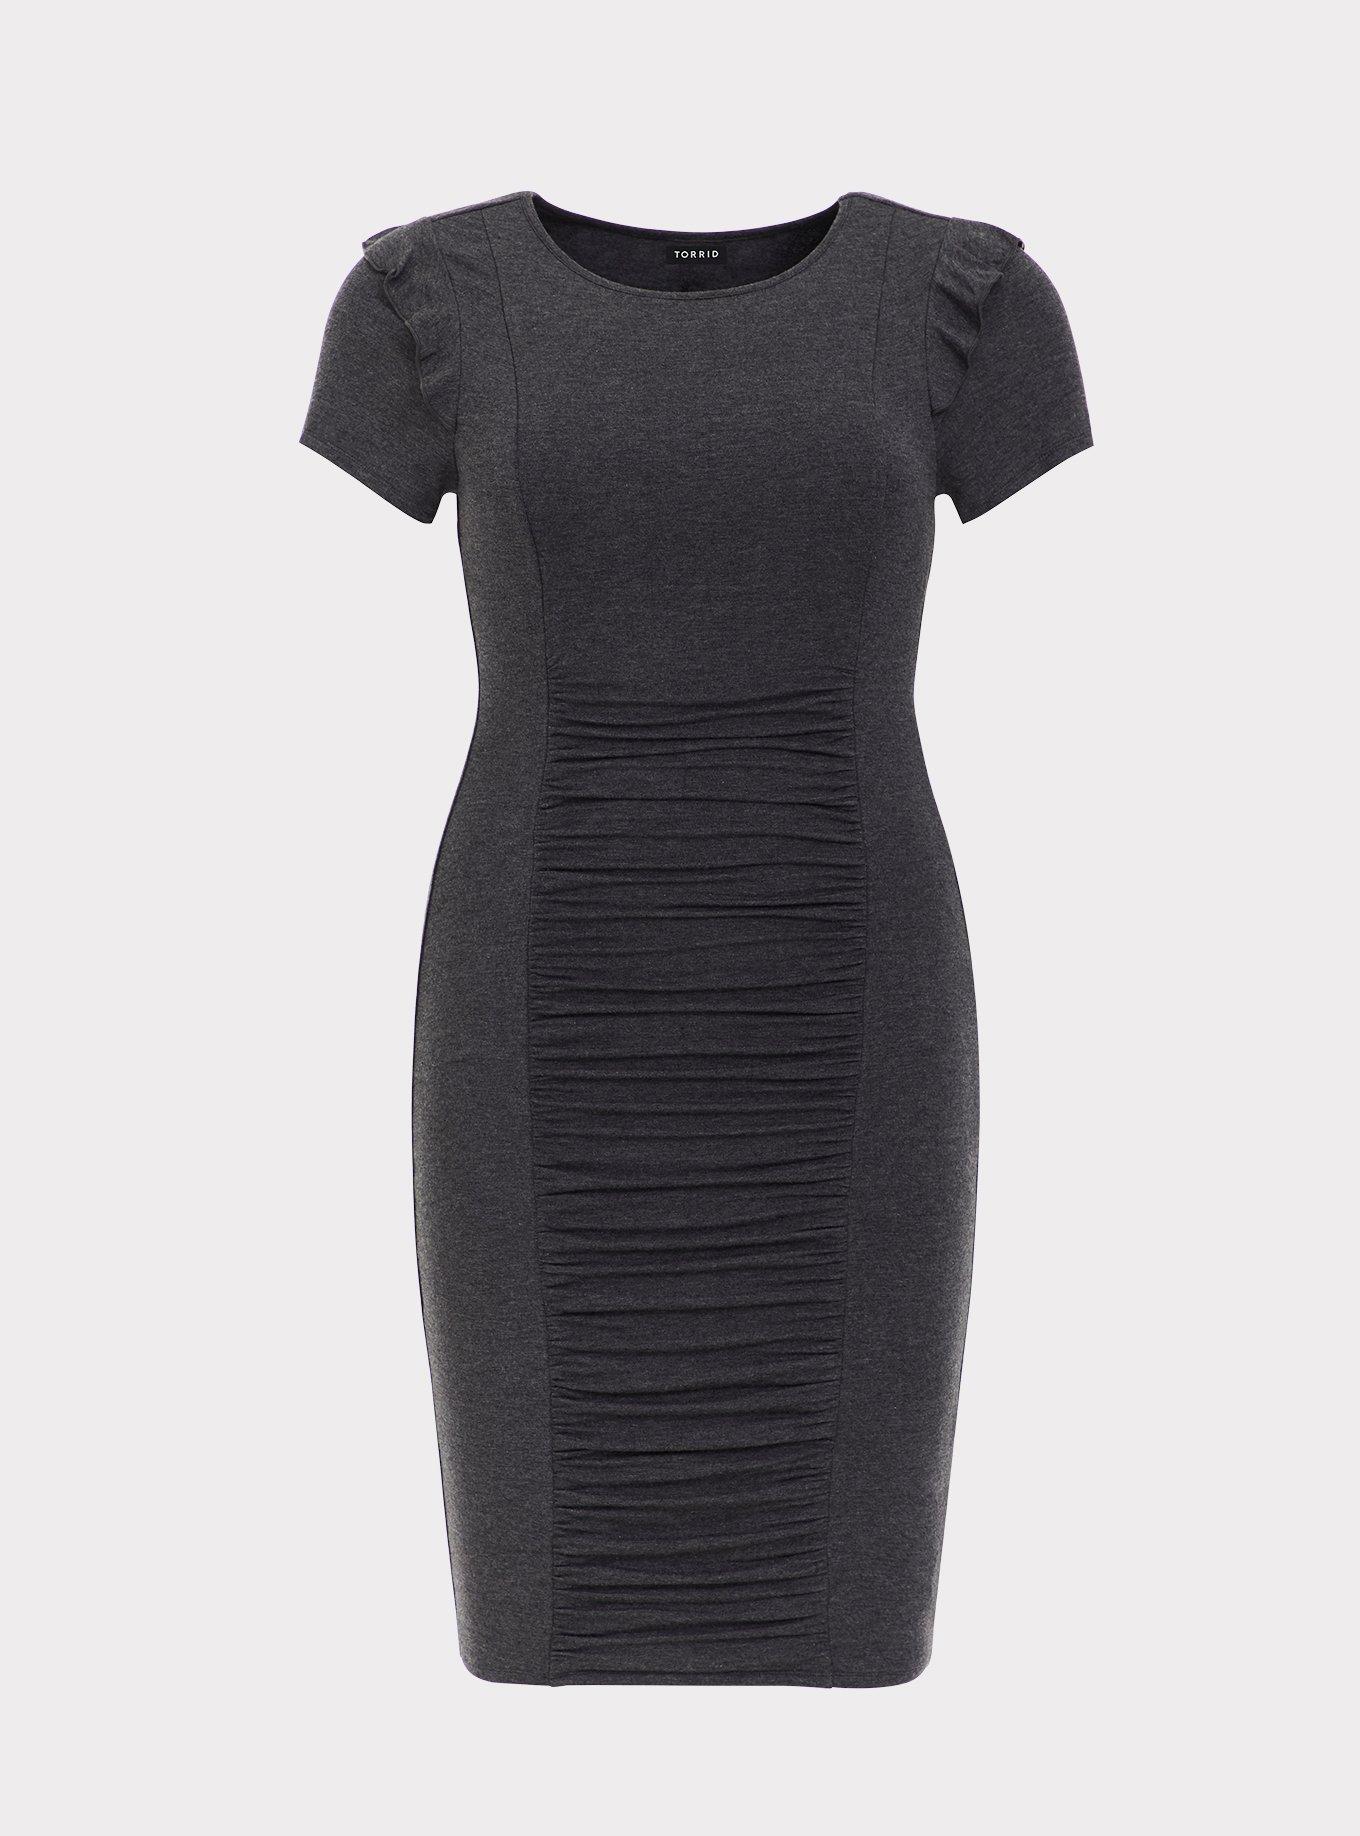 Plus Size - Grey Ruched Jersey Bodycon Dress - Torrid